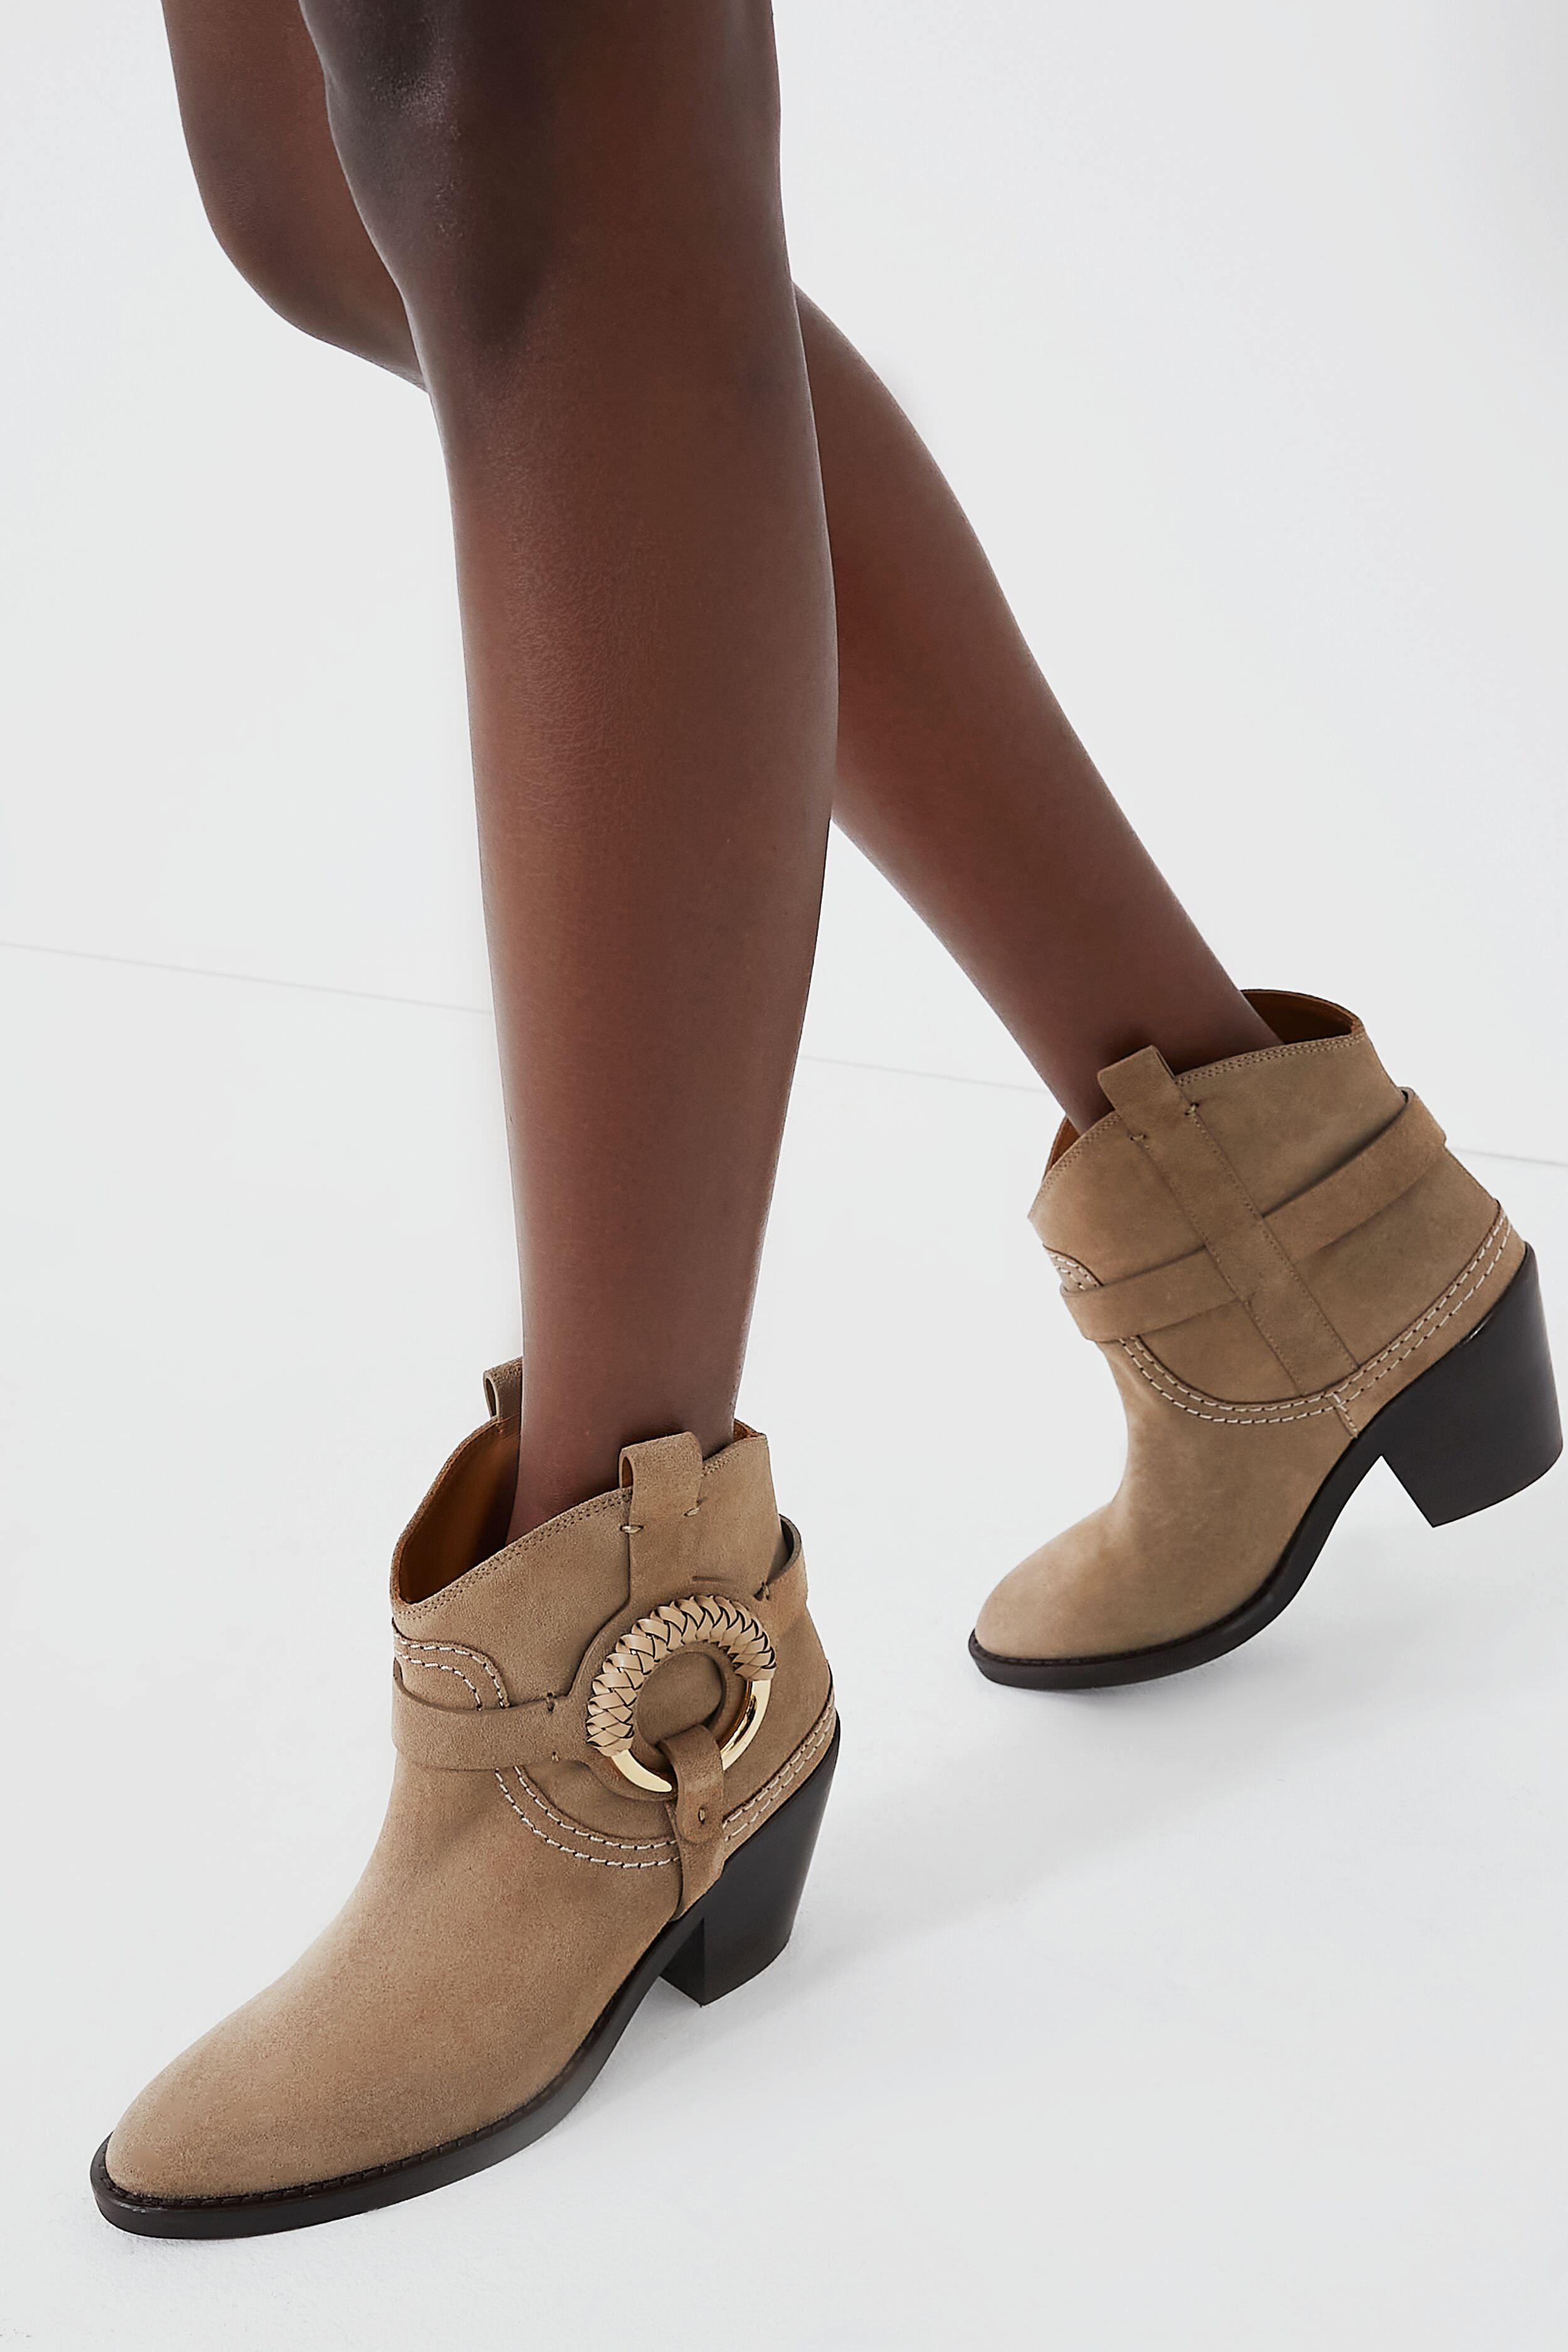 Isabel Marant Donatee Low Heels Ankle Boots In Beige Leather for Women